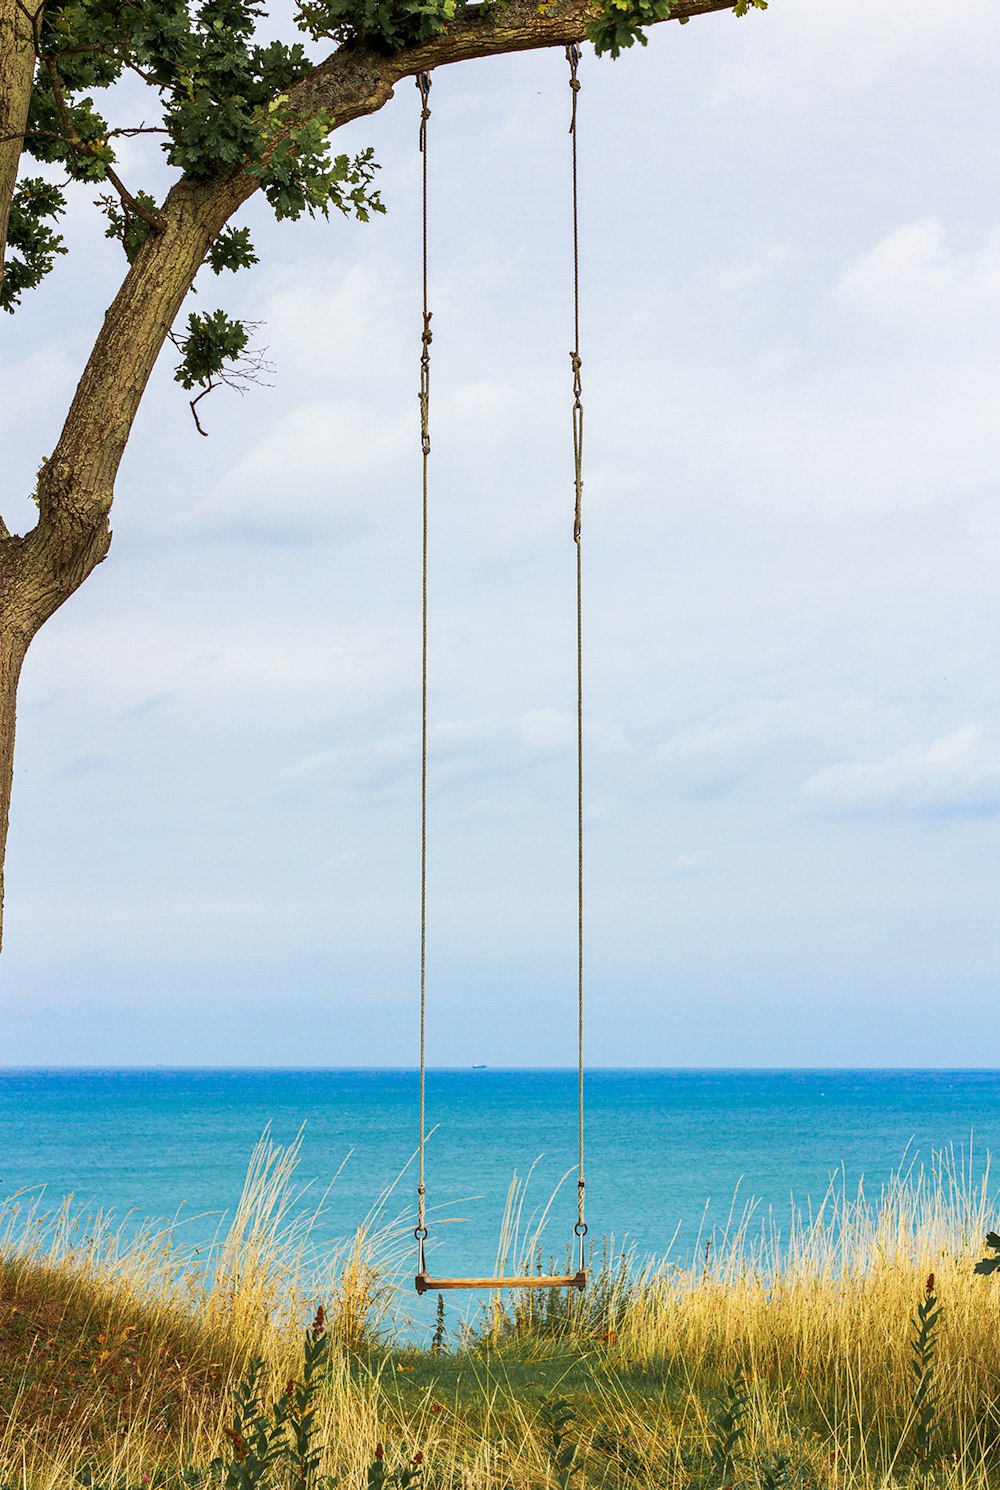 brown wooden swing on tree trunk near sea during daytime